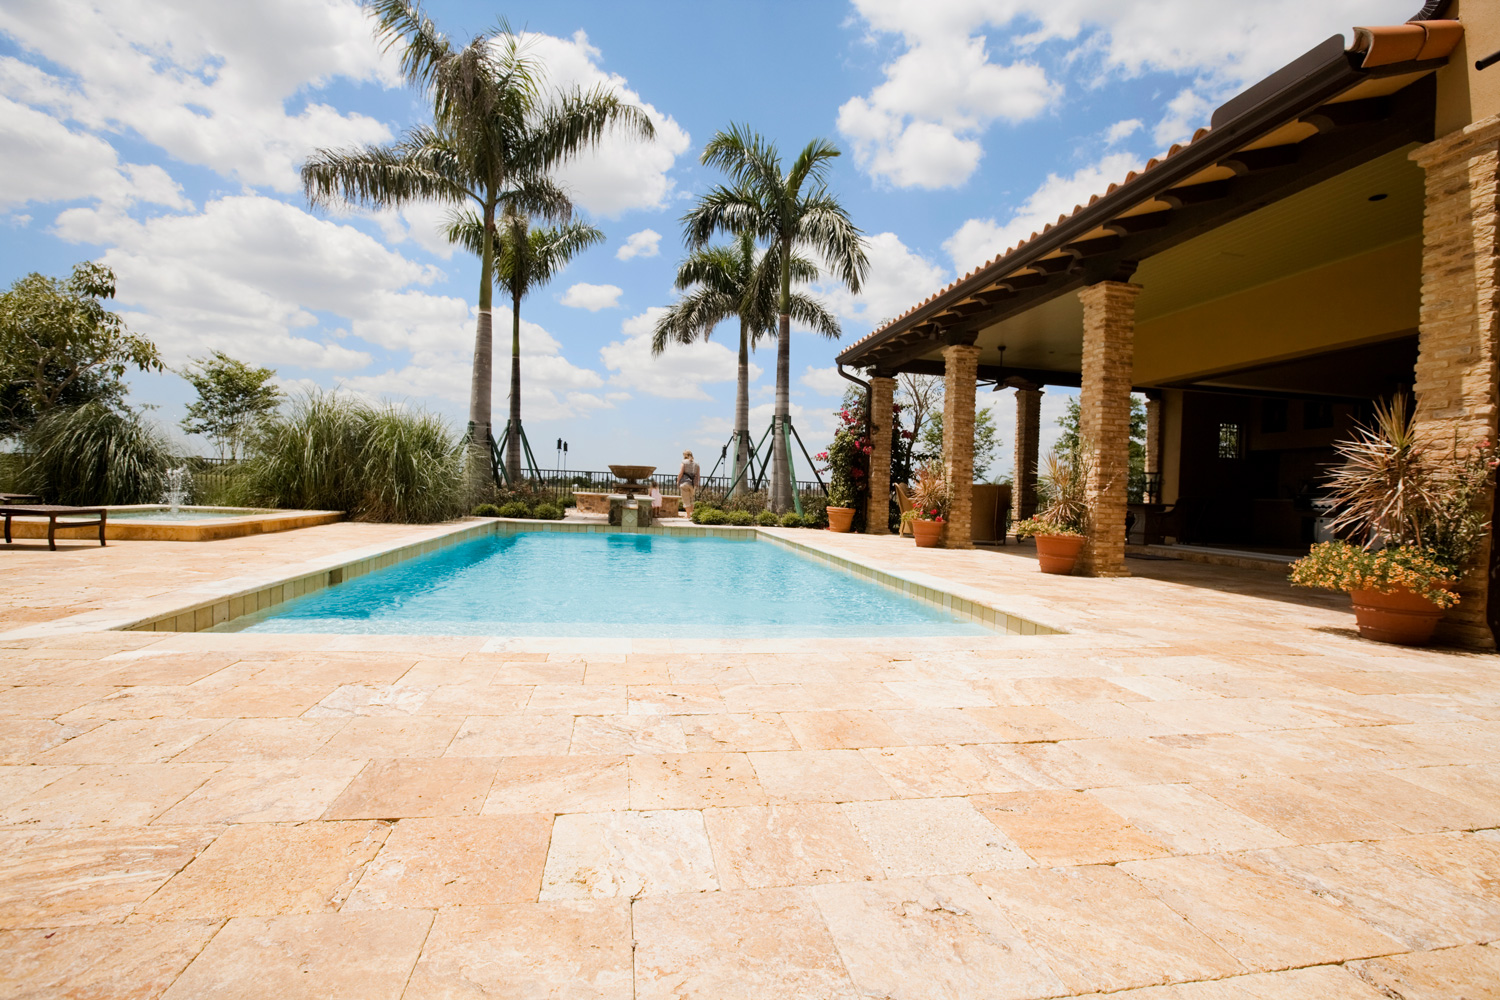 Luxury home with large pool and travertine patio.